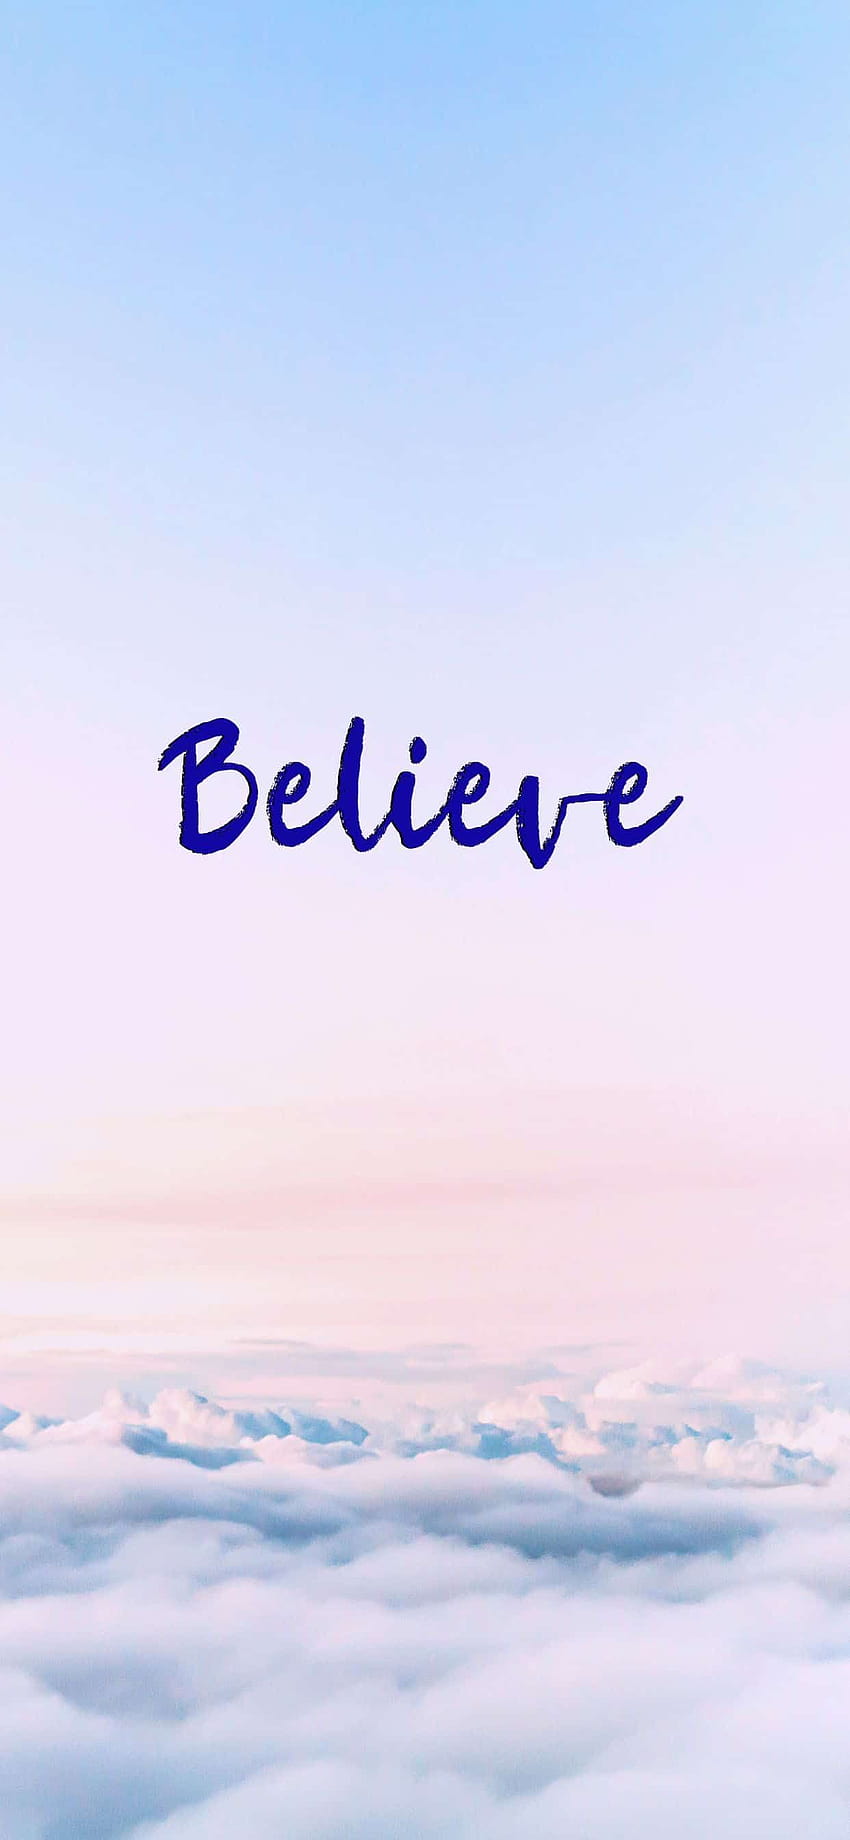 Believe Iphone posted by Michelle Sellers, believe that HD phone wallpaper